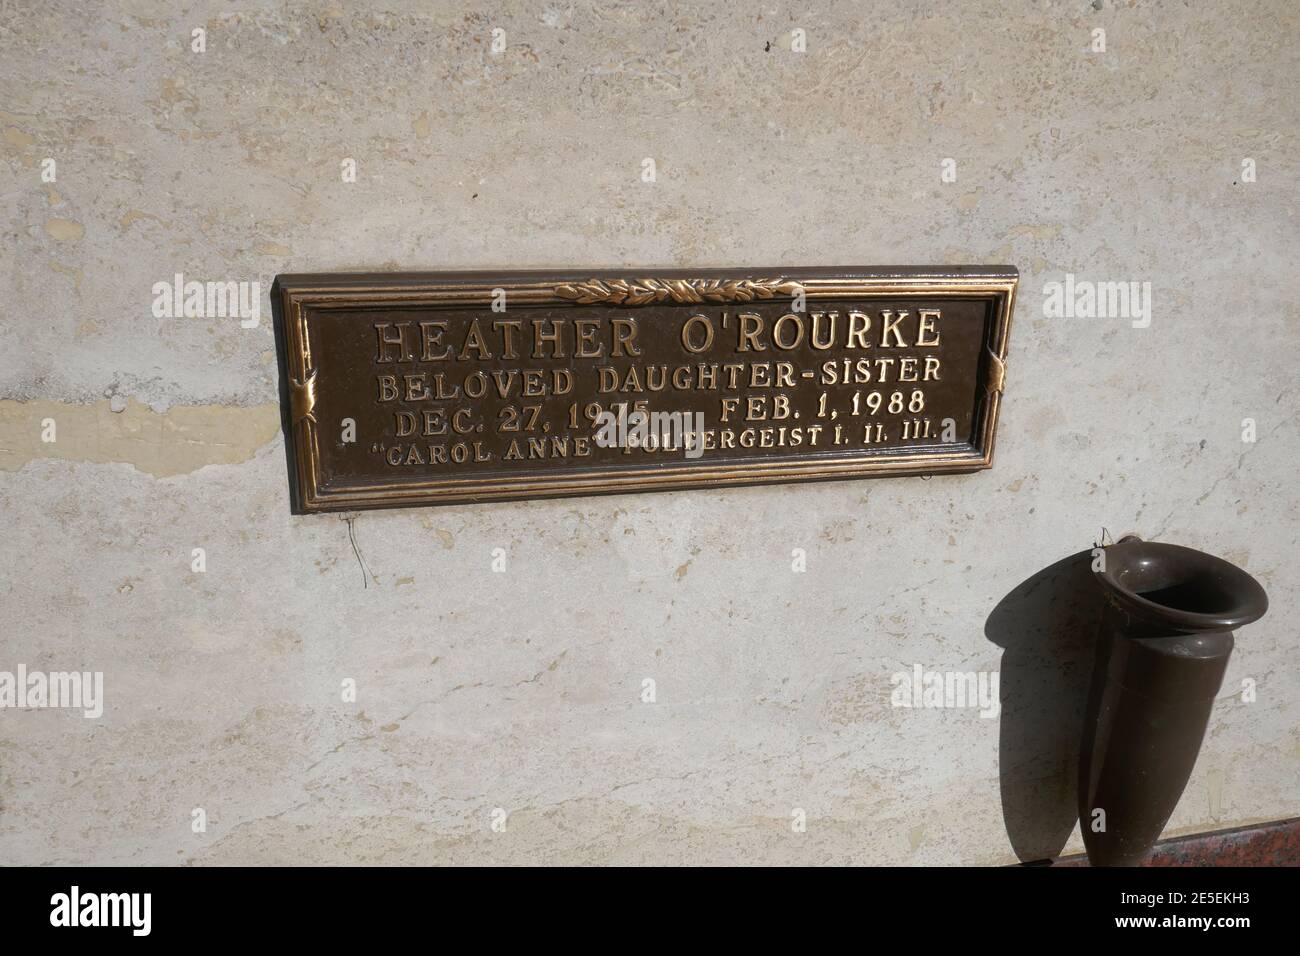 Los Angeles, California, USA 26th January 2021 A general view of atmosphere of actress Heather O'Rourke's grave at Pierce Brothers Westwood Village Memorial Park on January 26, 2021 in Los Angeles, California, USA. Photo by Barry King/Alamy Stock Photo Stock Photo